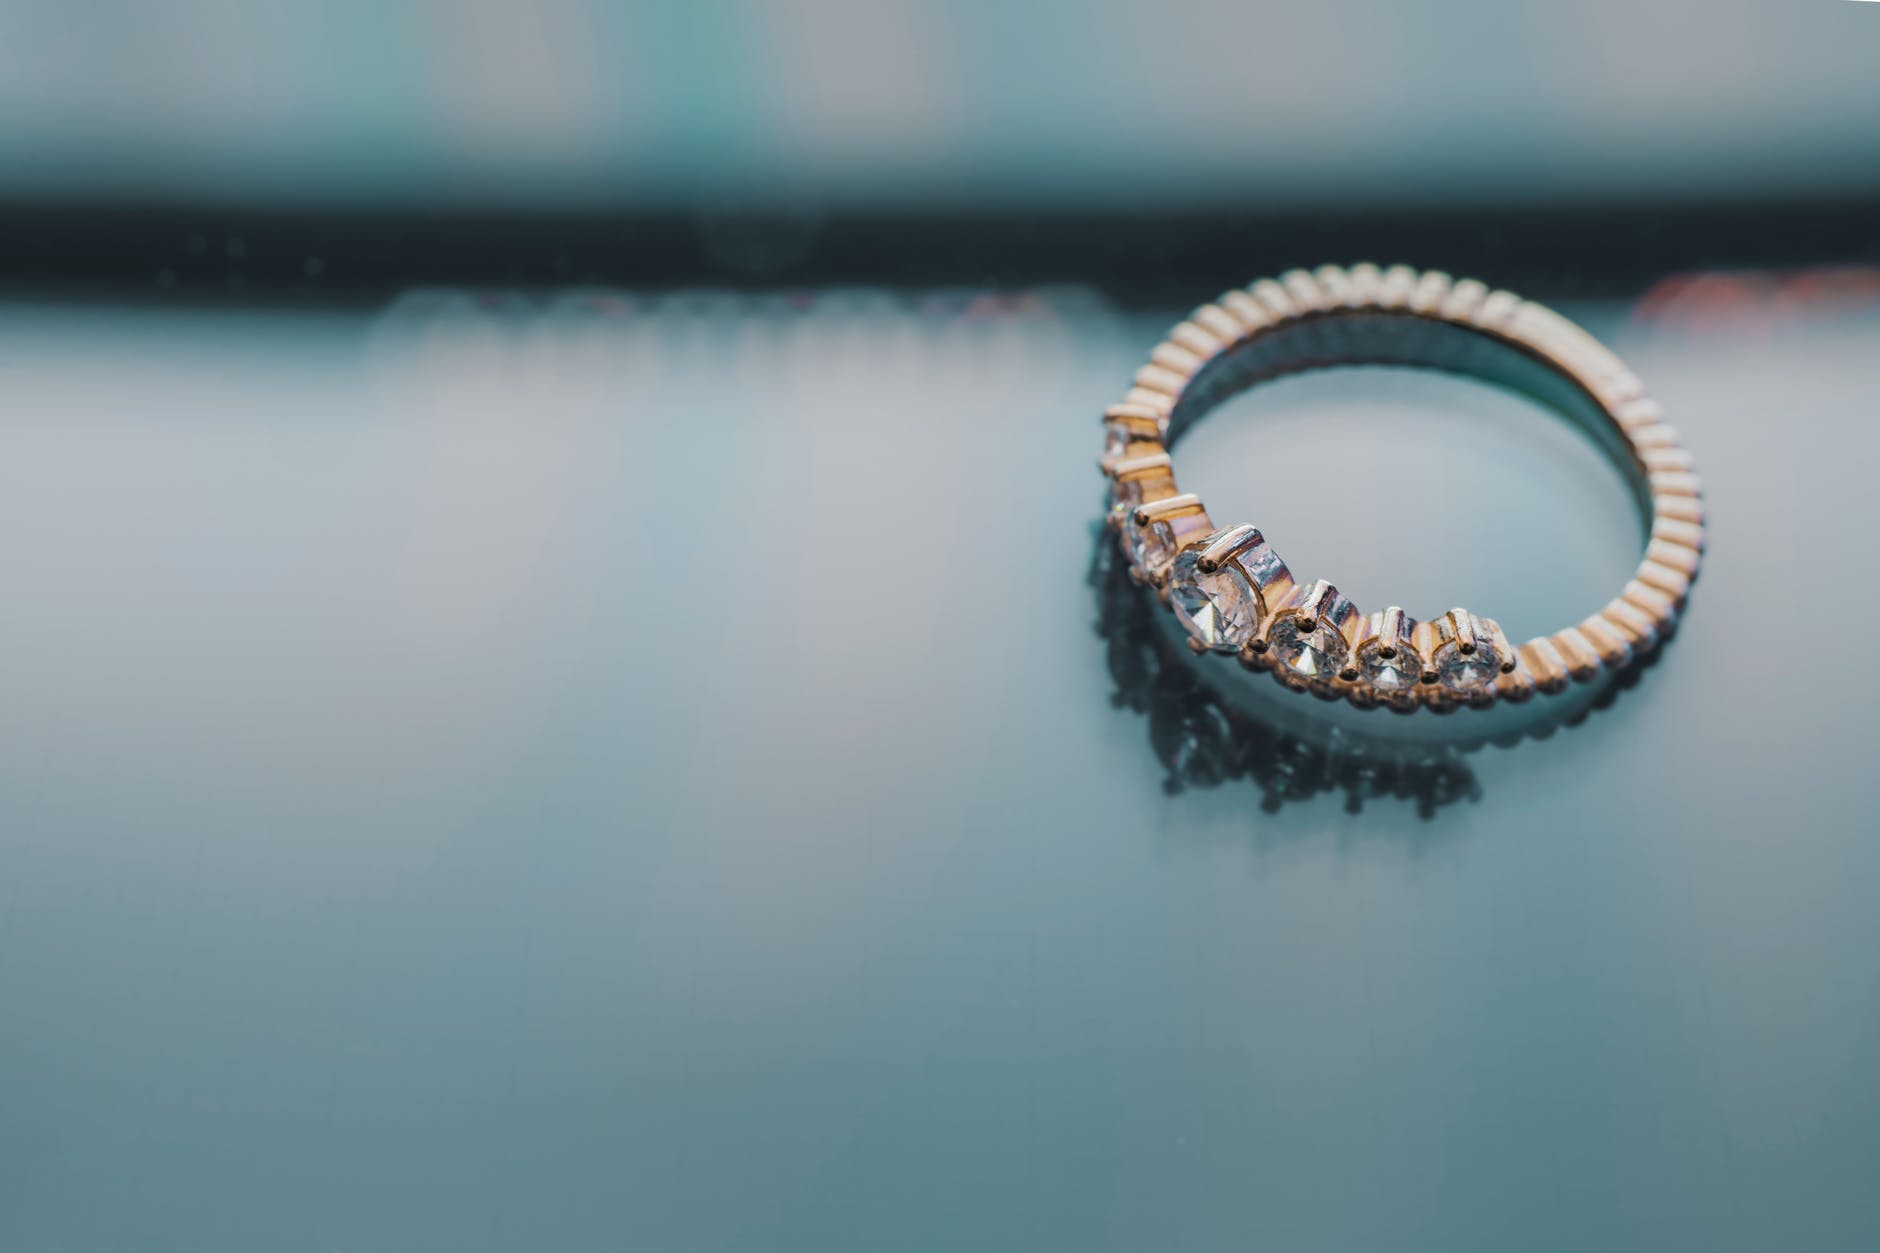 The ring that fell from the couch | Source: Pexels